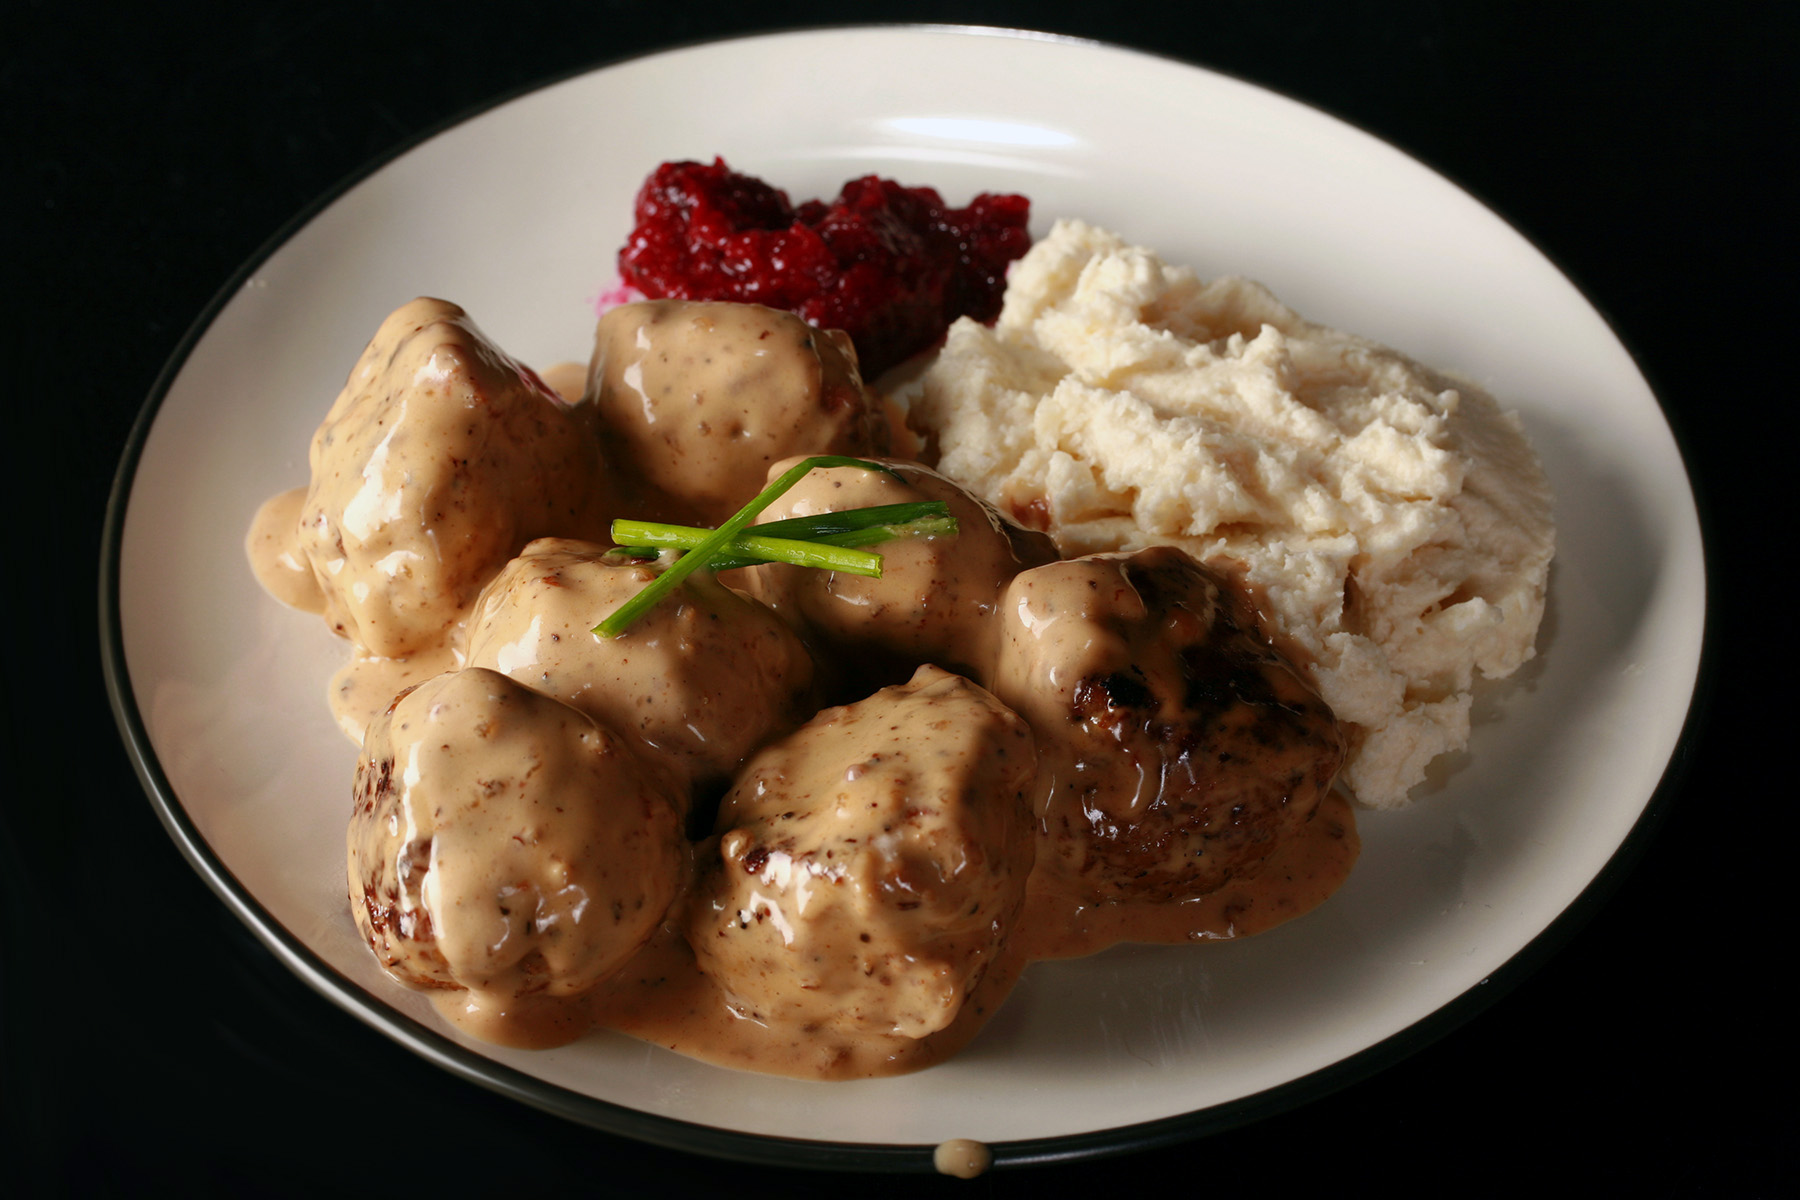 A plate of keto IKEA style Swedish meatballs with lingonberry sauce.